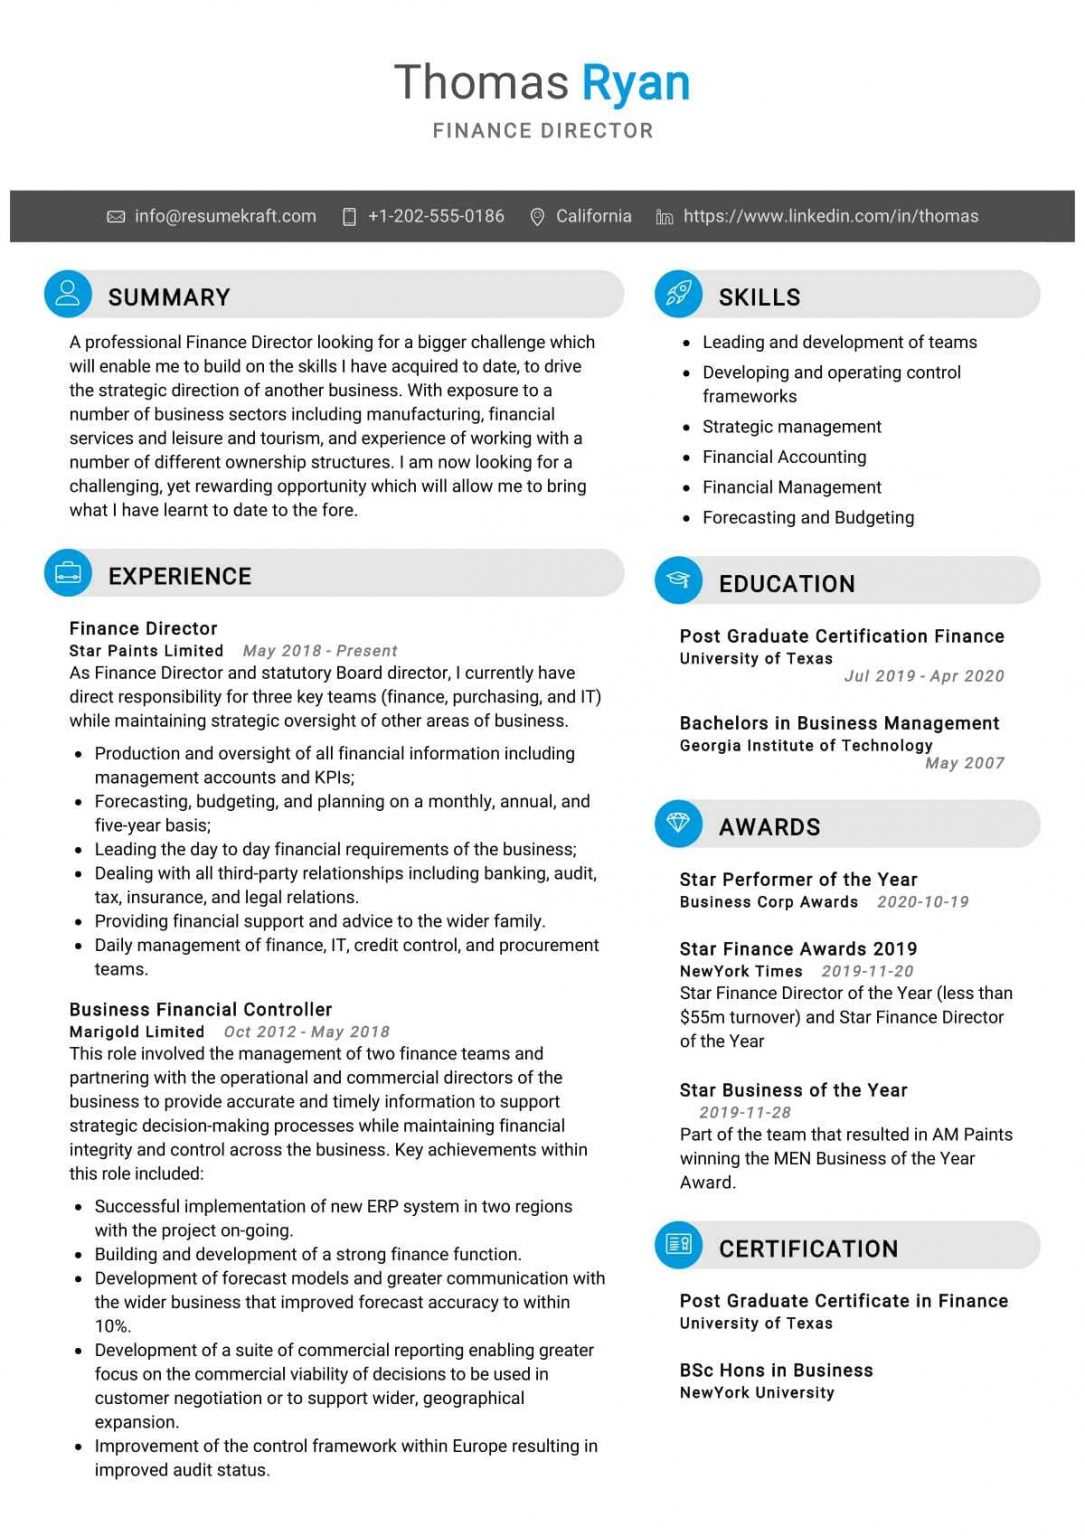 50-good-cv-examples-with-writing-guide-2021-resumekraft